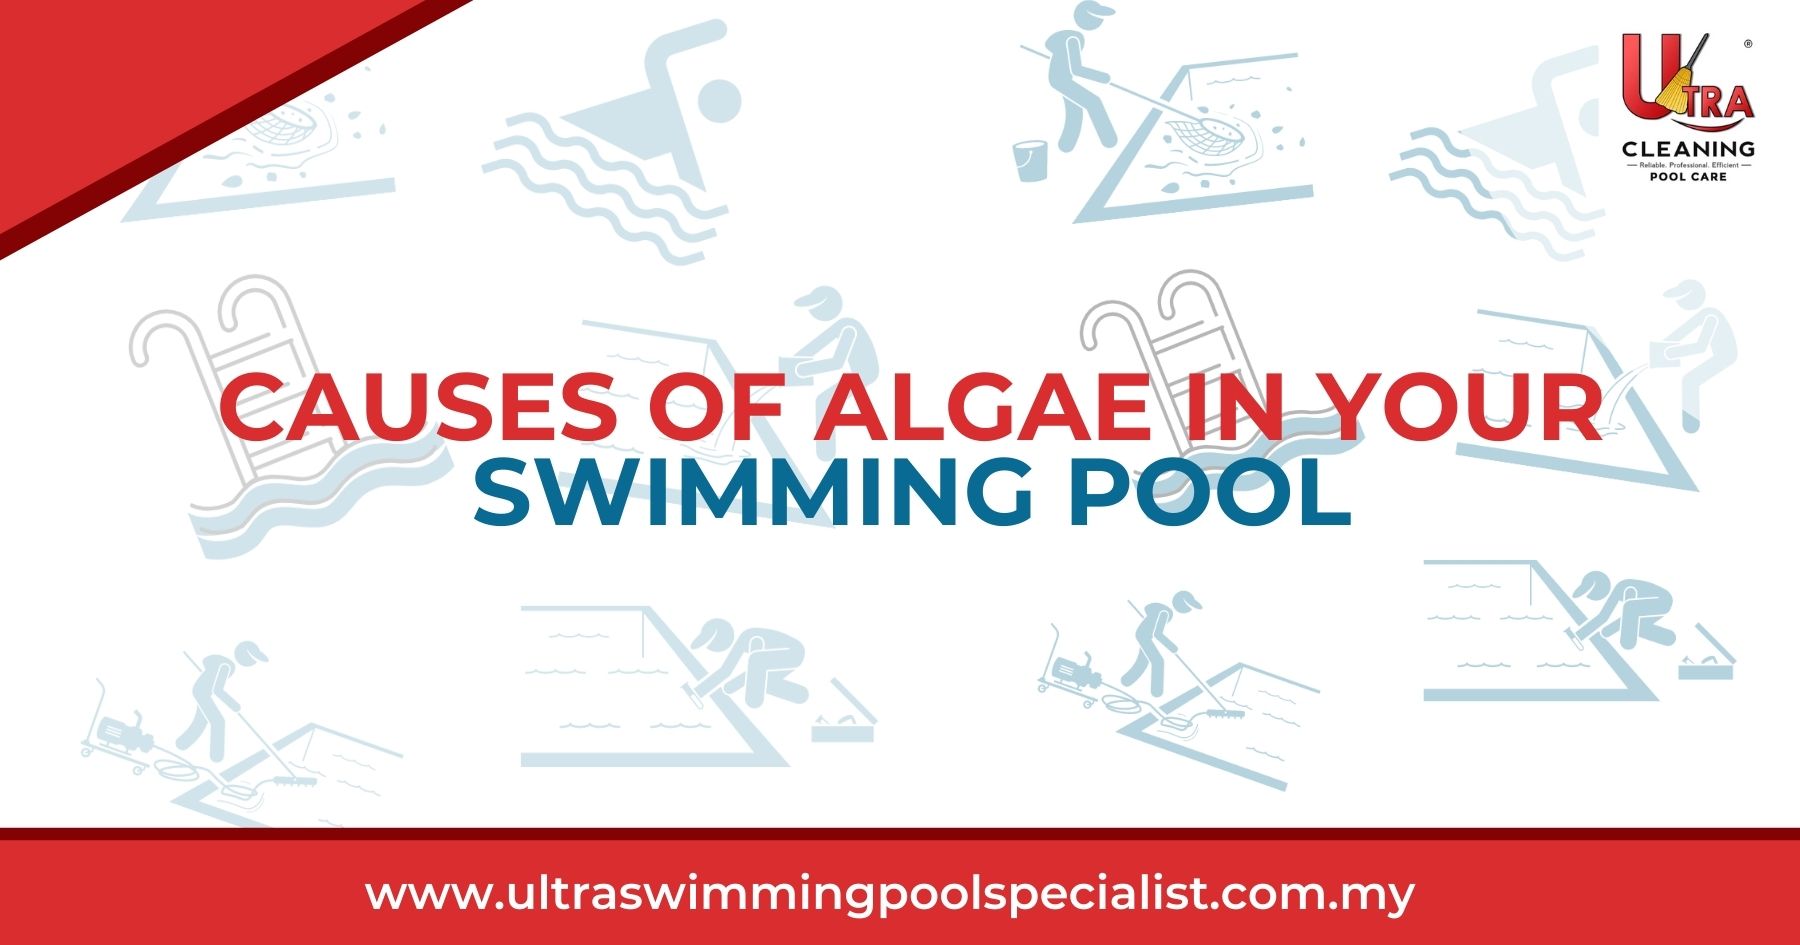 Causes of Algae in Your Swimming Pool